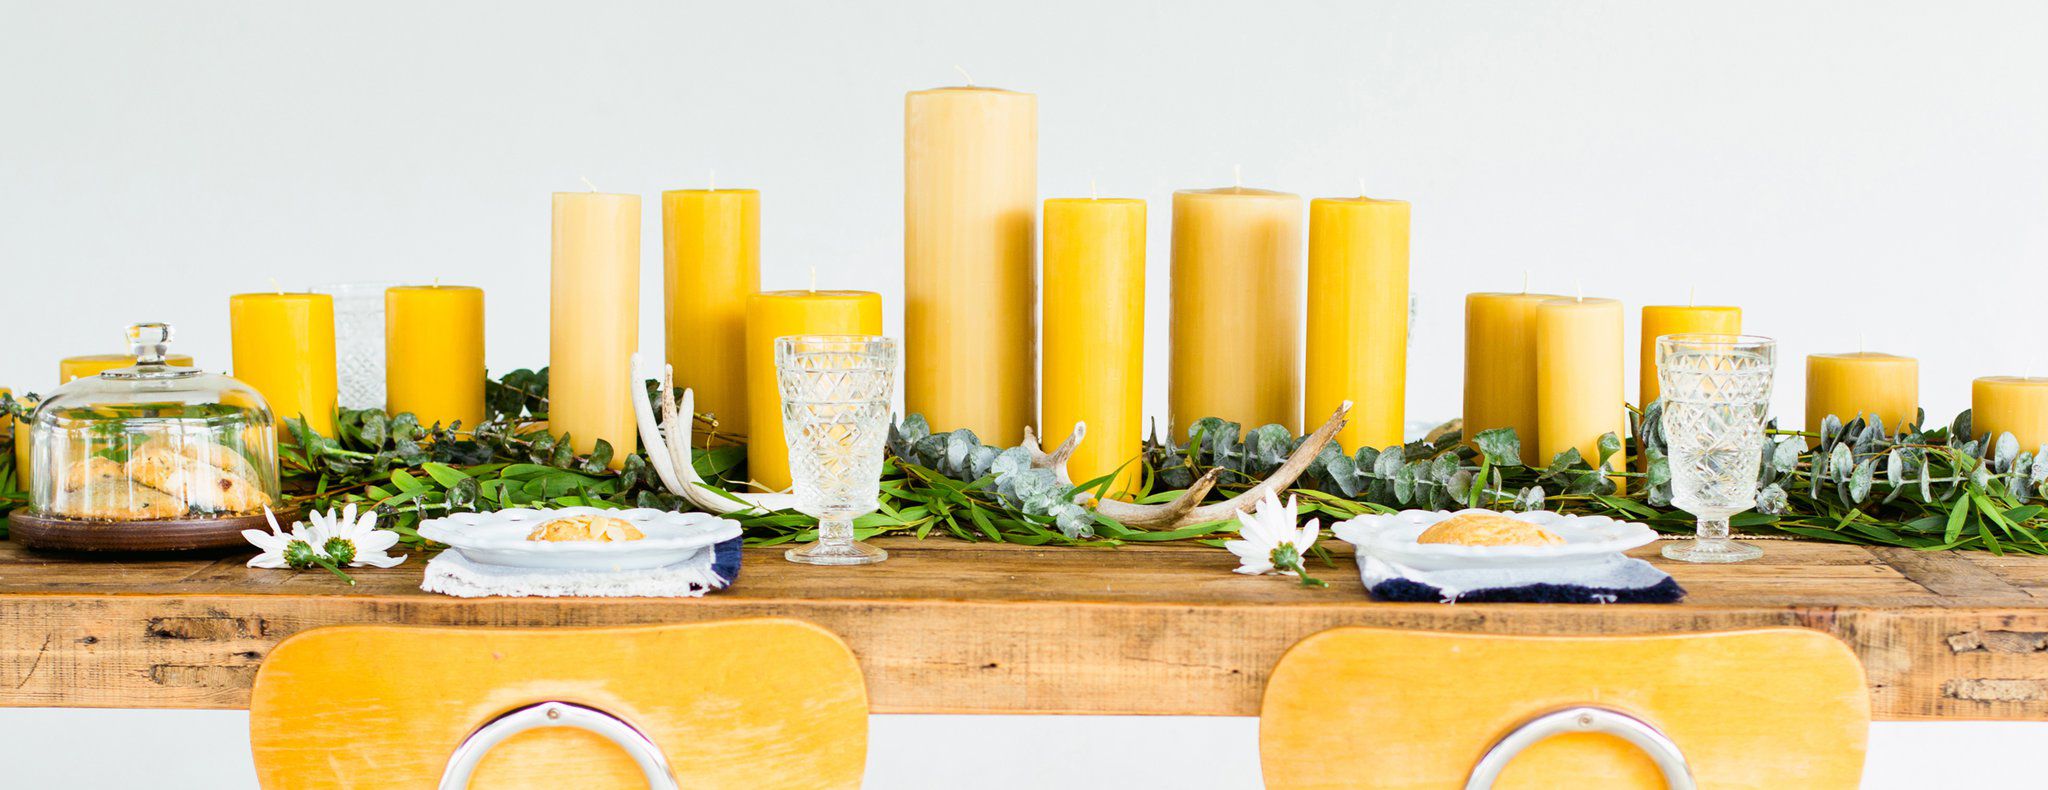 Beeswax Candles and Bulk Beeswax